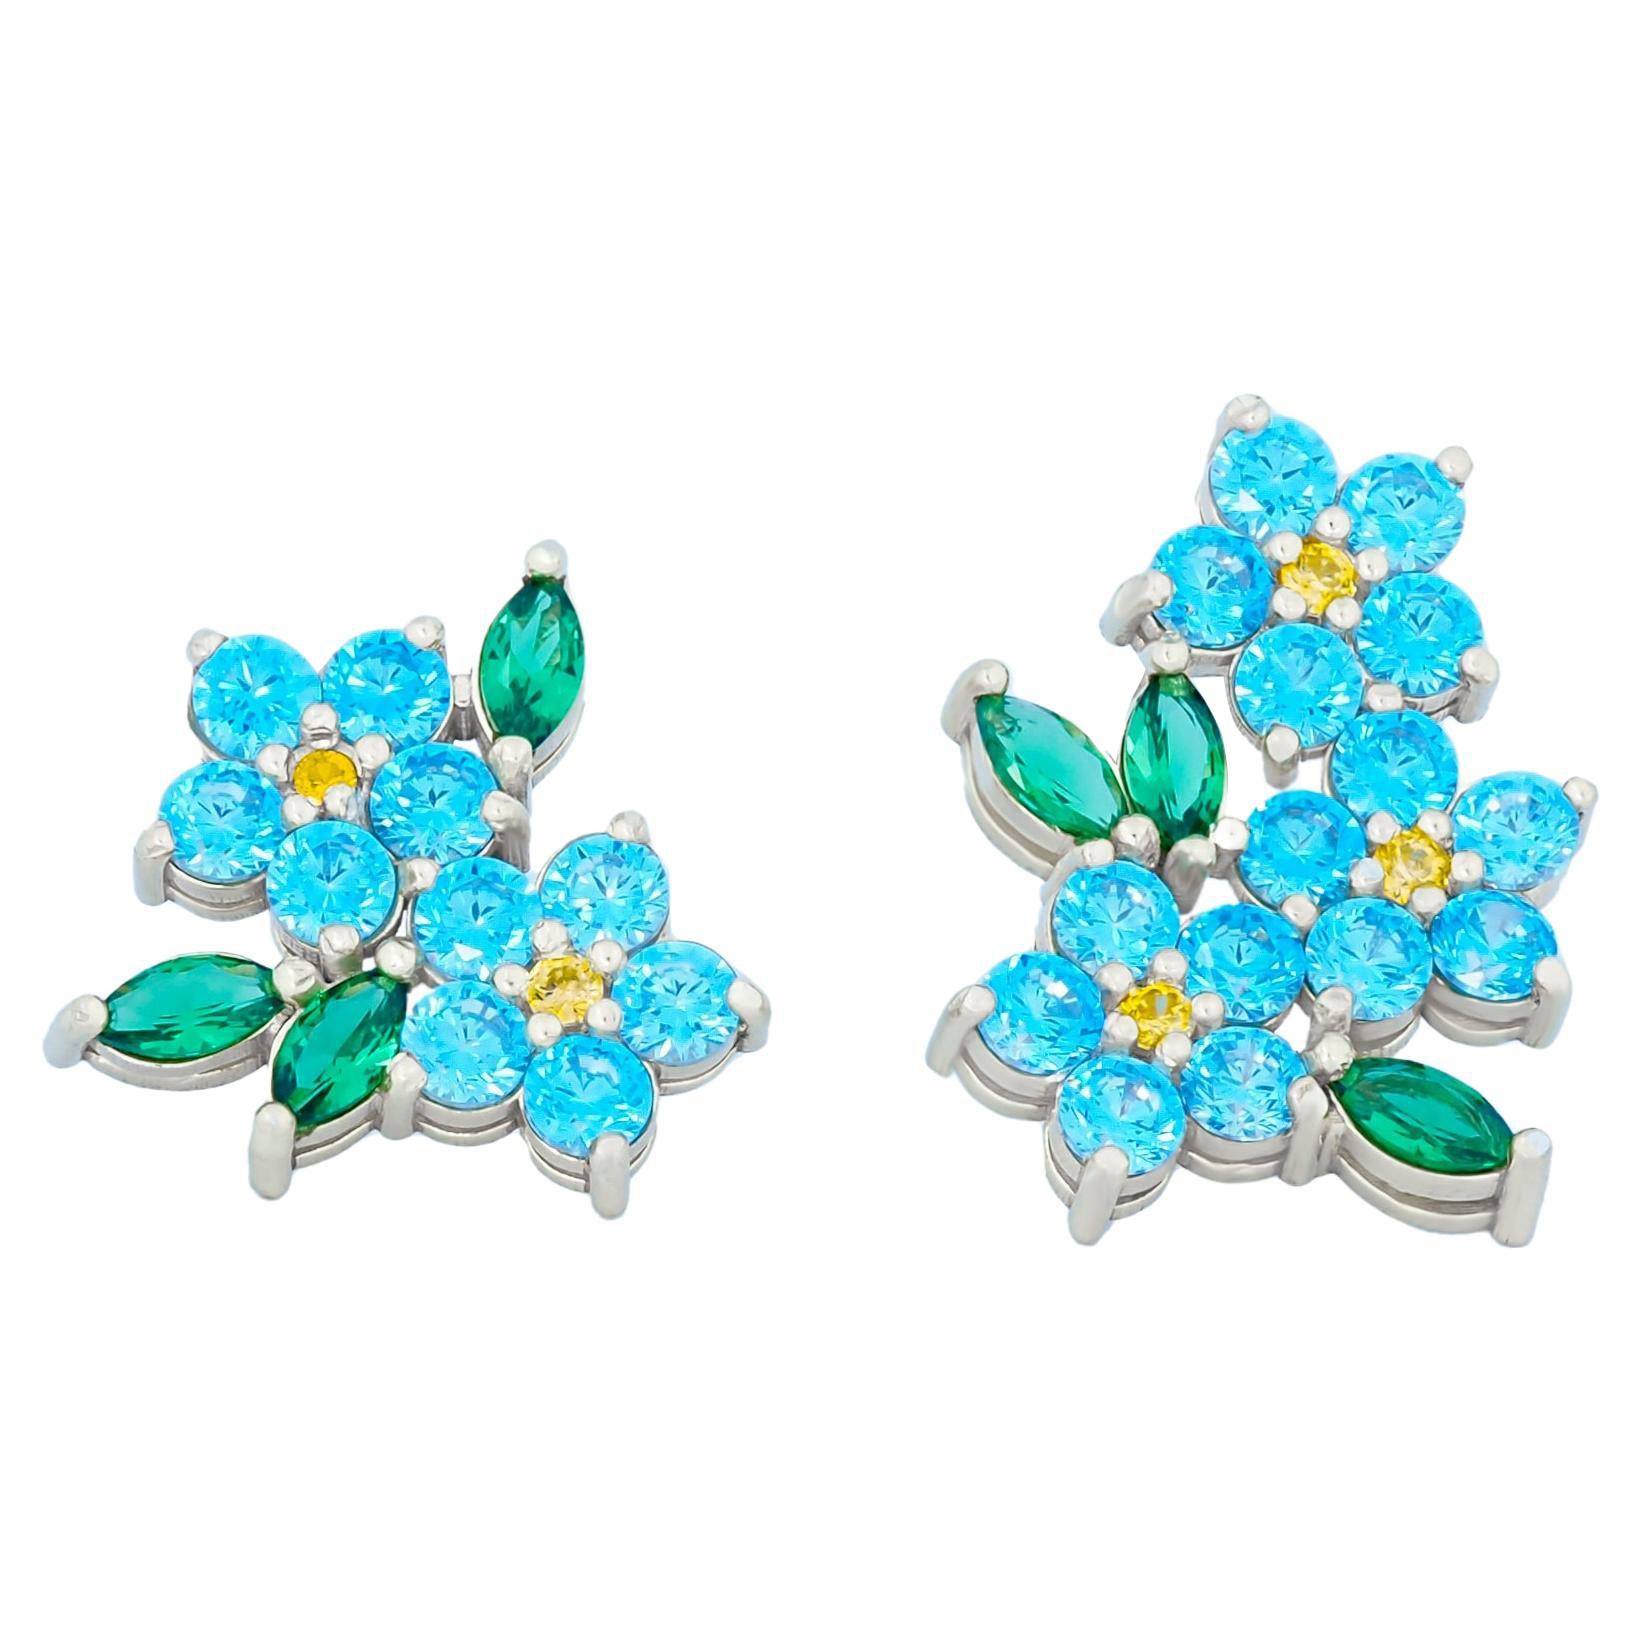 Forget me know flower earrings studs in 14k gold